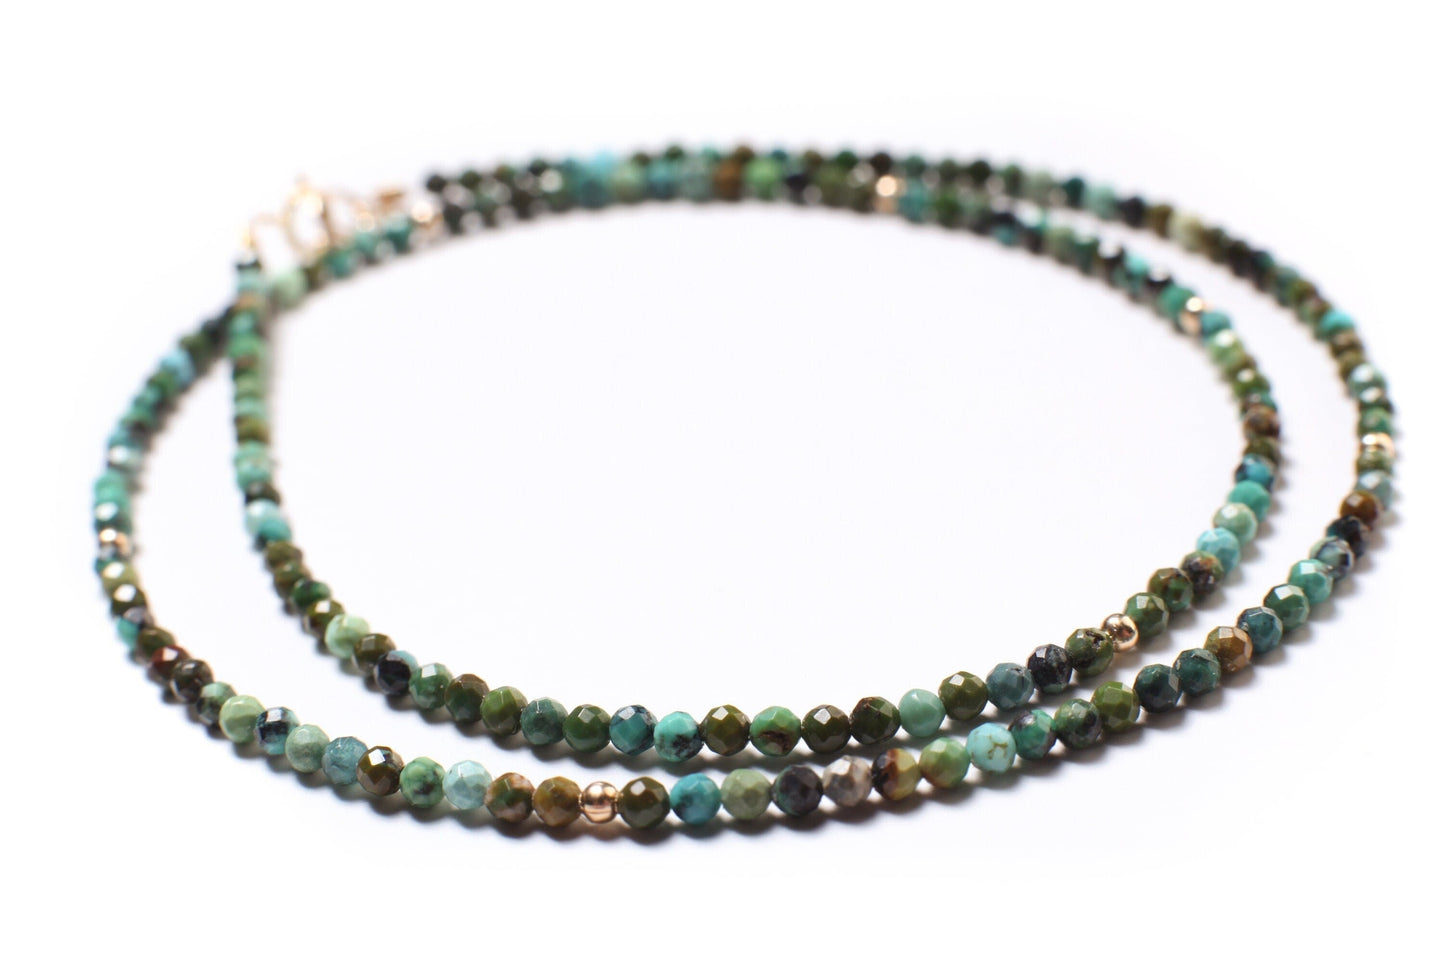 African Turquoise 2mm Faceted Round with 14k Gold Filled Spacer and Clasp Dainty Choker Layering Elegant Necklace, December Birthstone Gift